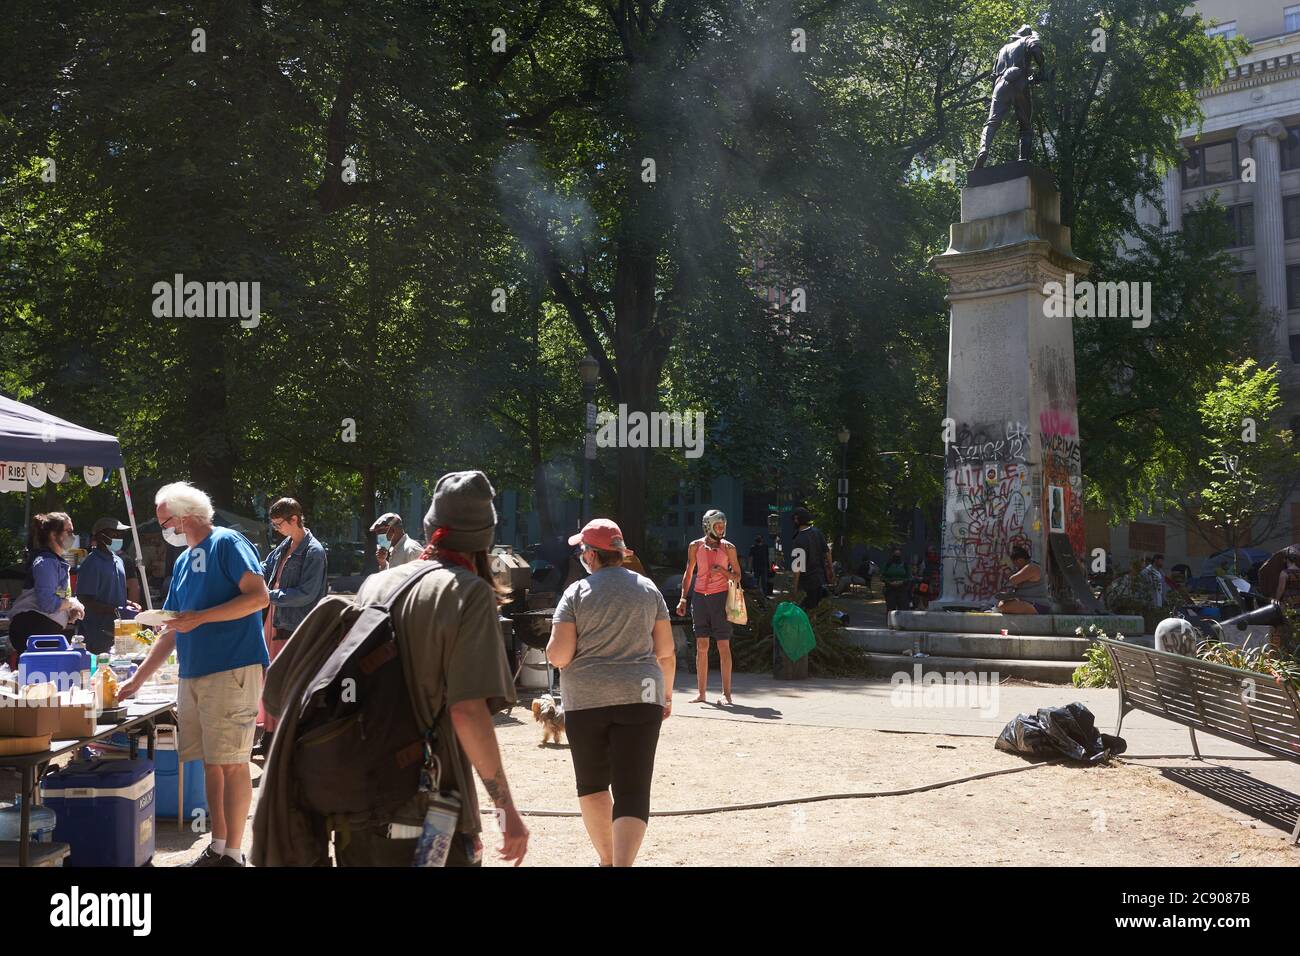 BLM protesters turn the Lownsdale Square, a park adjacent to the federal courthouse in Portland, into their hub amid the ongoing demonstration. Stock Photo